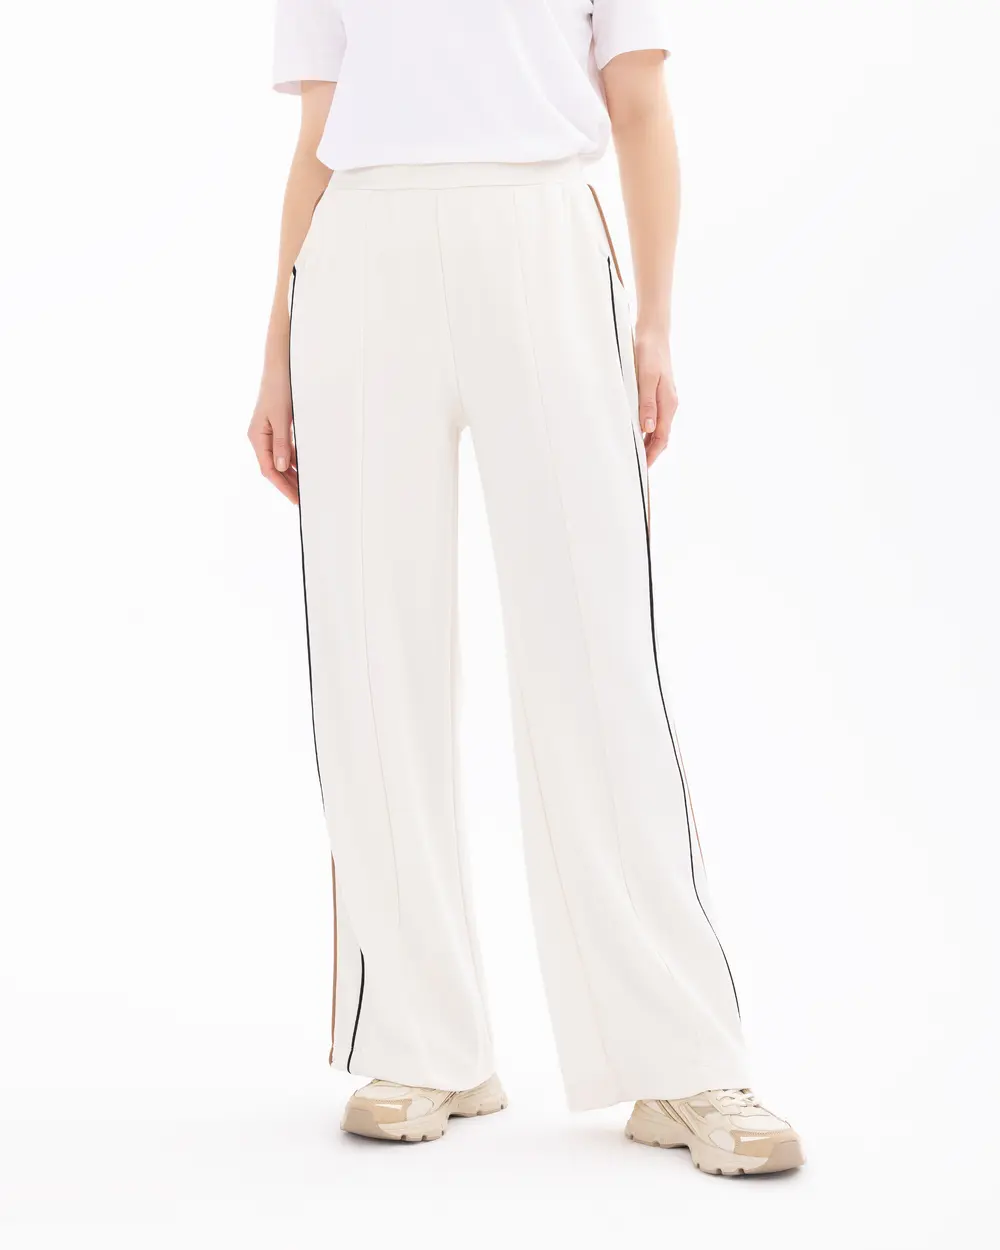 Elastic Waist Sweatpants with Piping Detail